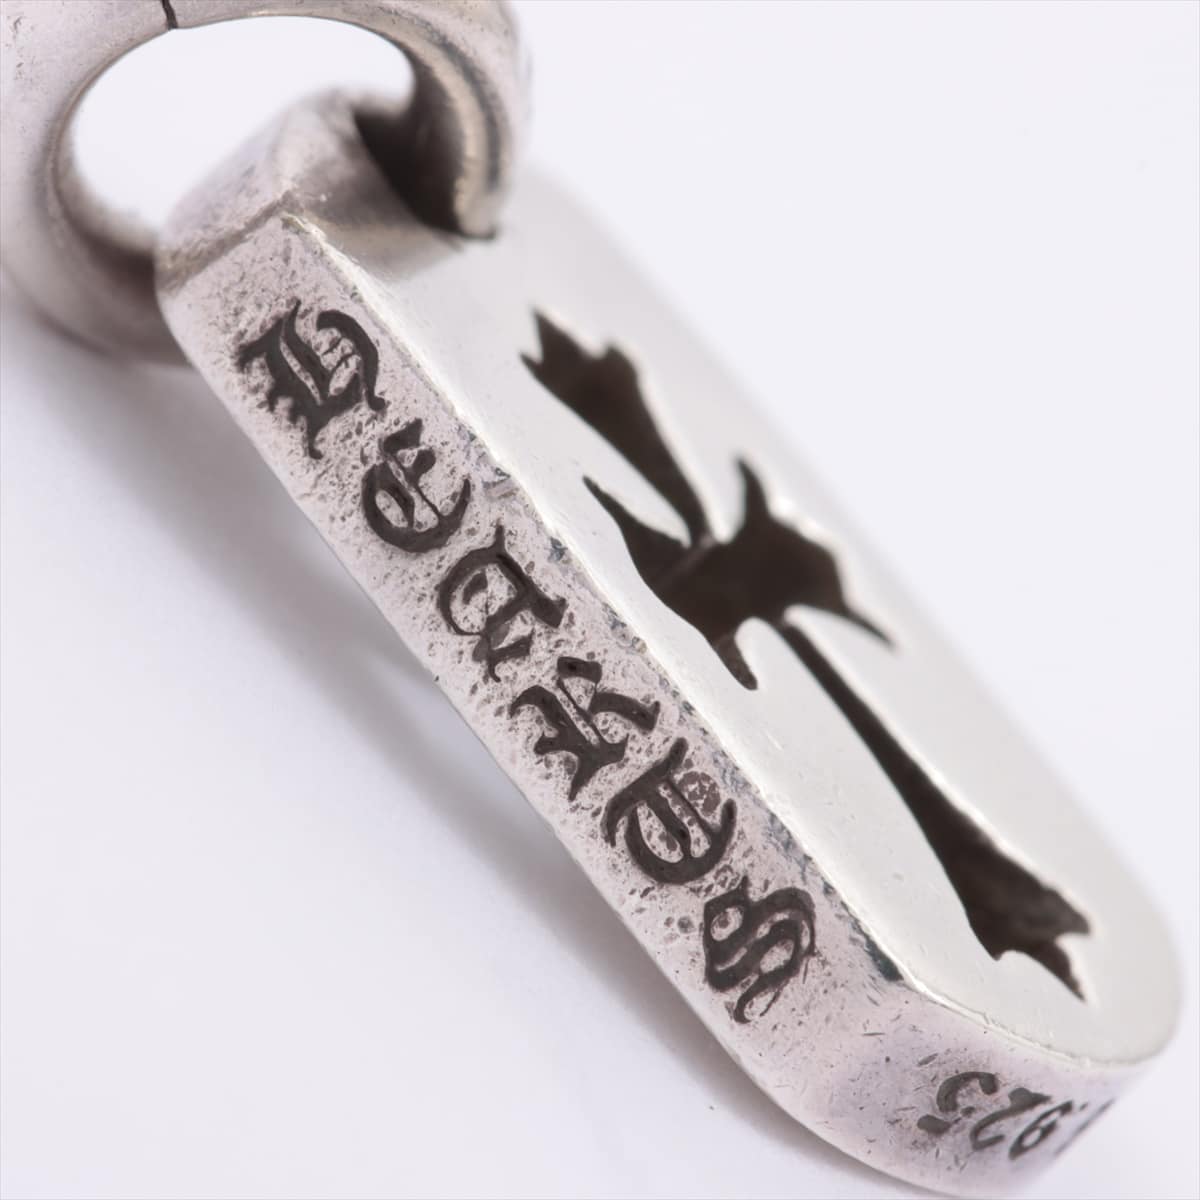 Chrome Hearts Tiny cut out cross Dog Tag 925 3.4g With invoice